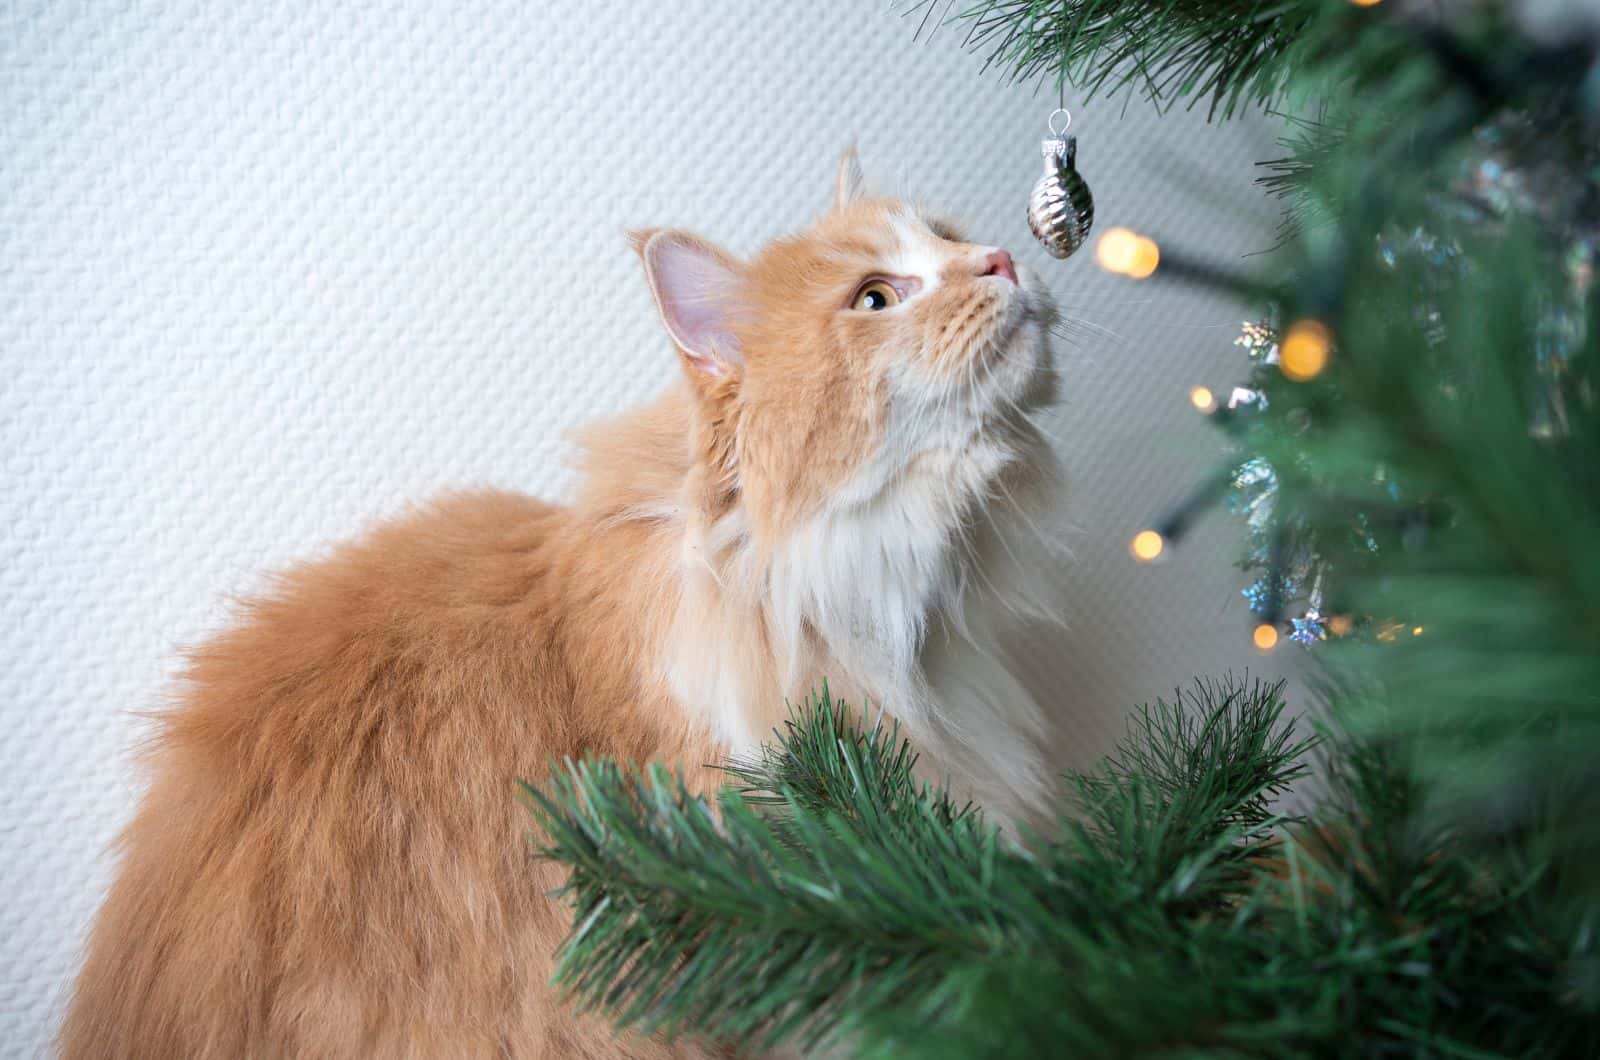 cat sniffing a Christmas tree decoration